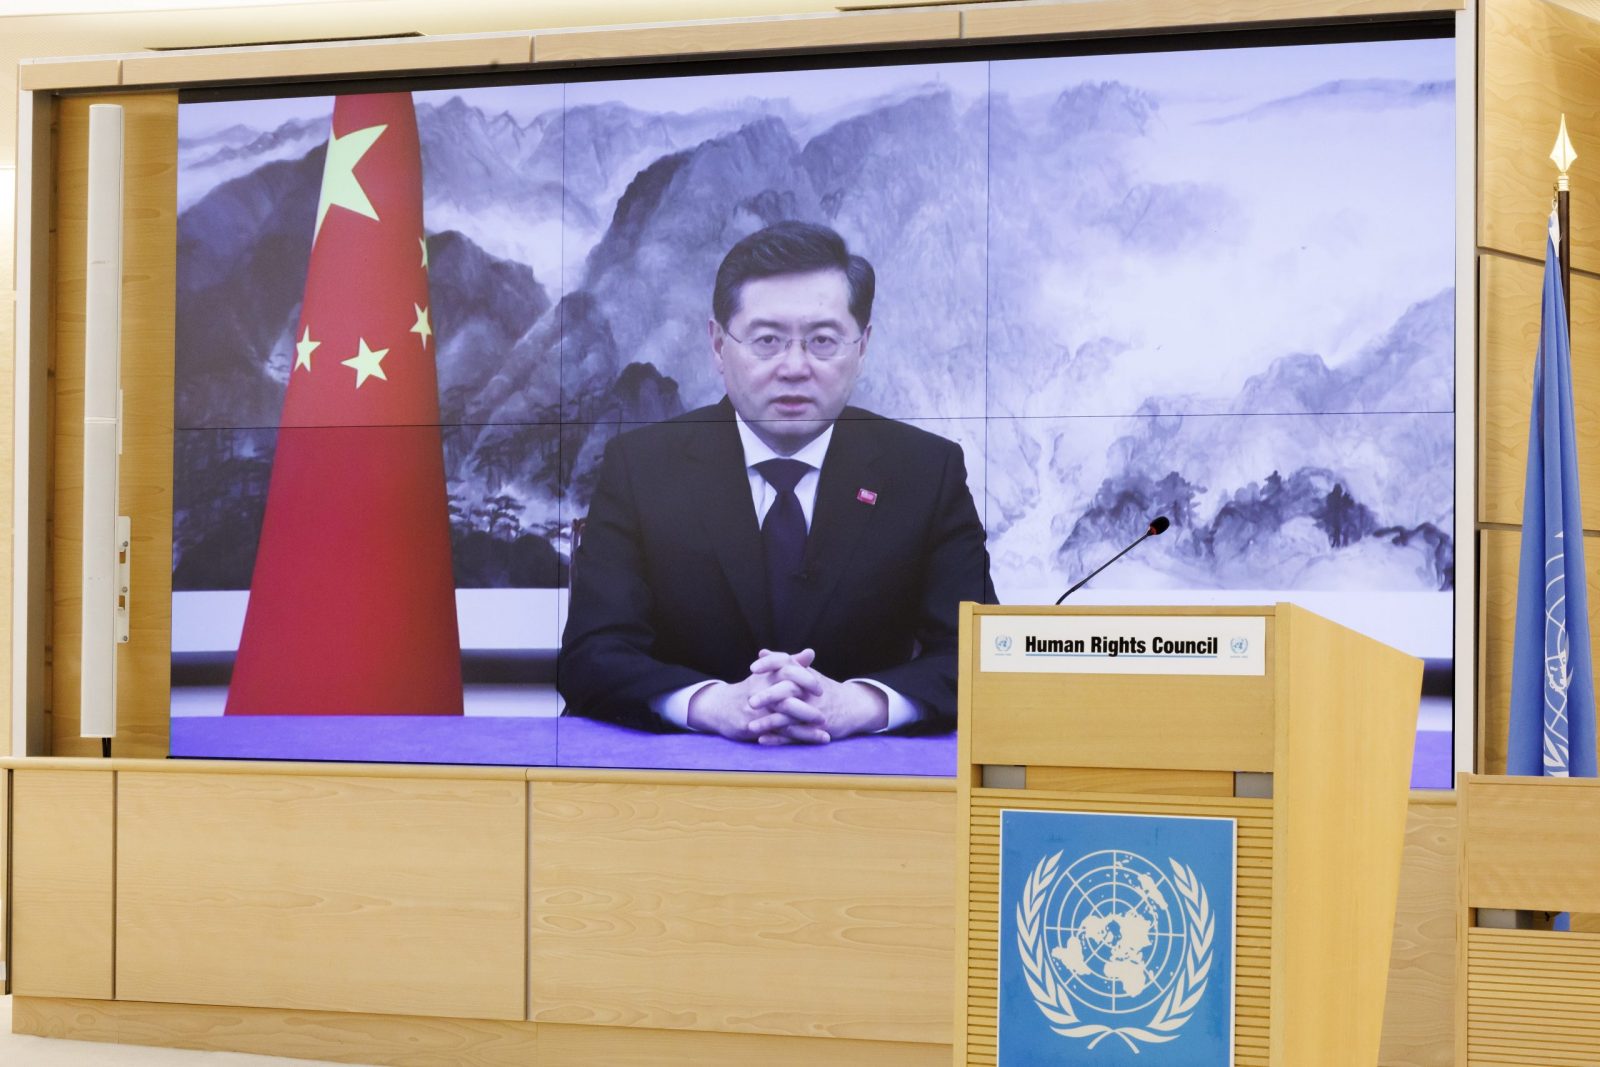 epa10493938 China's Minister for Foreign Affairs Qin Gang appears on a screen as he delivers a remote statement, during the High-Level Segment of the 52nd session of the Human Rights Council, at the European headquarters of the United Nations in Geneva, Switzerland, 27 February 2023.  EPA/SALVATORE DI NOLFI